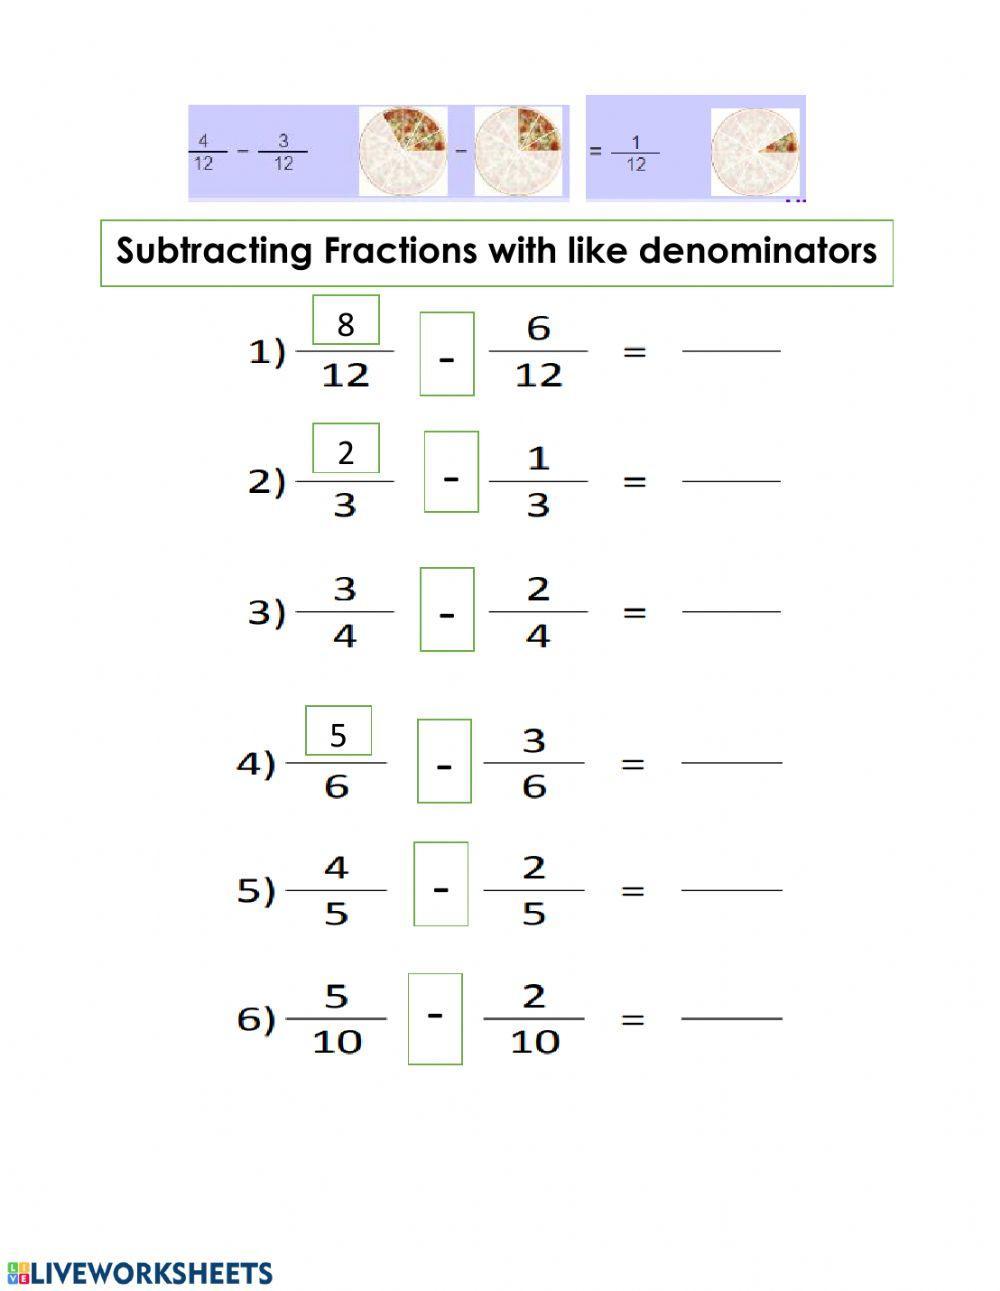 Subtraction Fractions